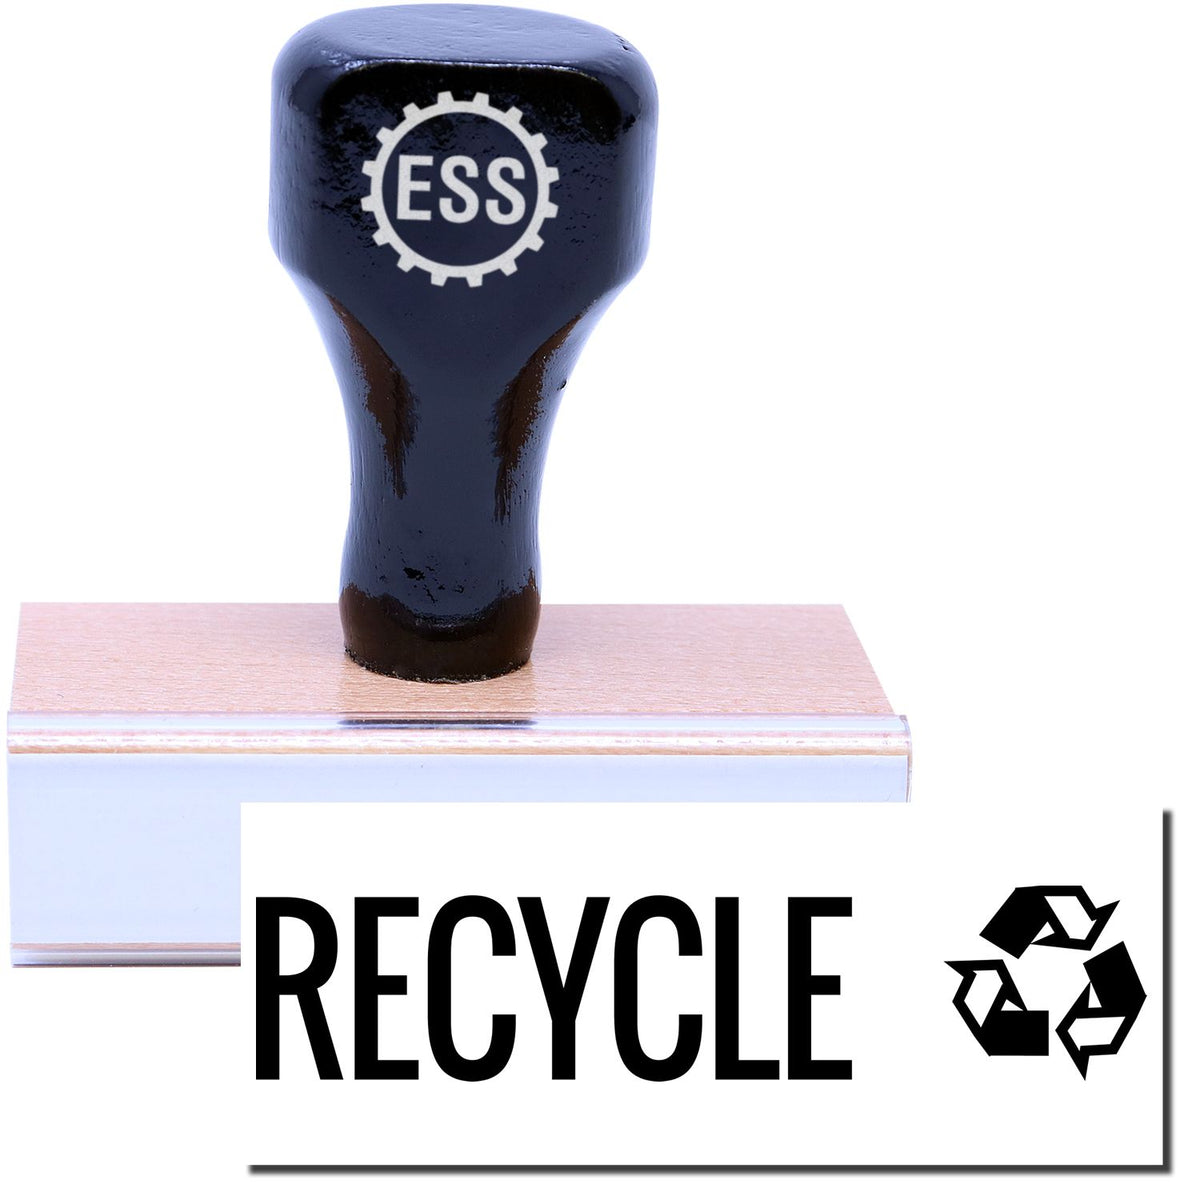 A stock office rubber stamp with a stamped image showing how the text &quot;RECYCLE&quot; in a large font with the recycling icon on the right side is displayed after stamping.